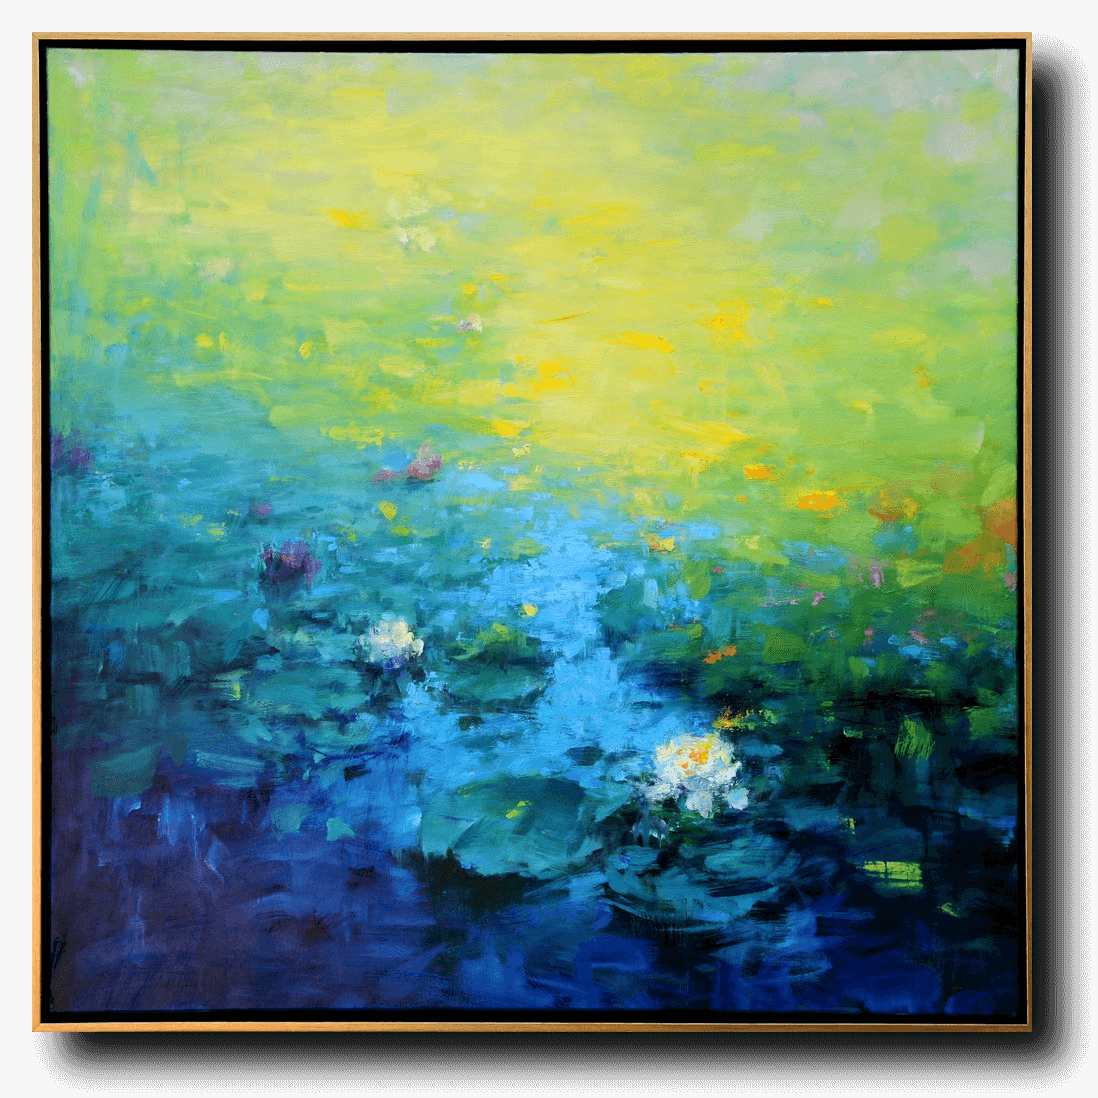 Summer Pond #3 by Ning Lee at LePrince Galleries